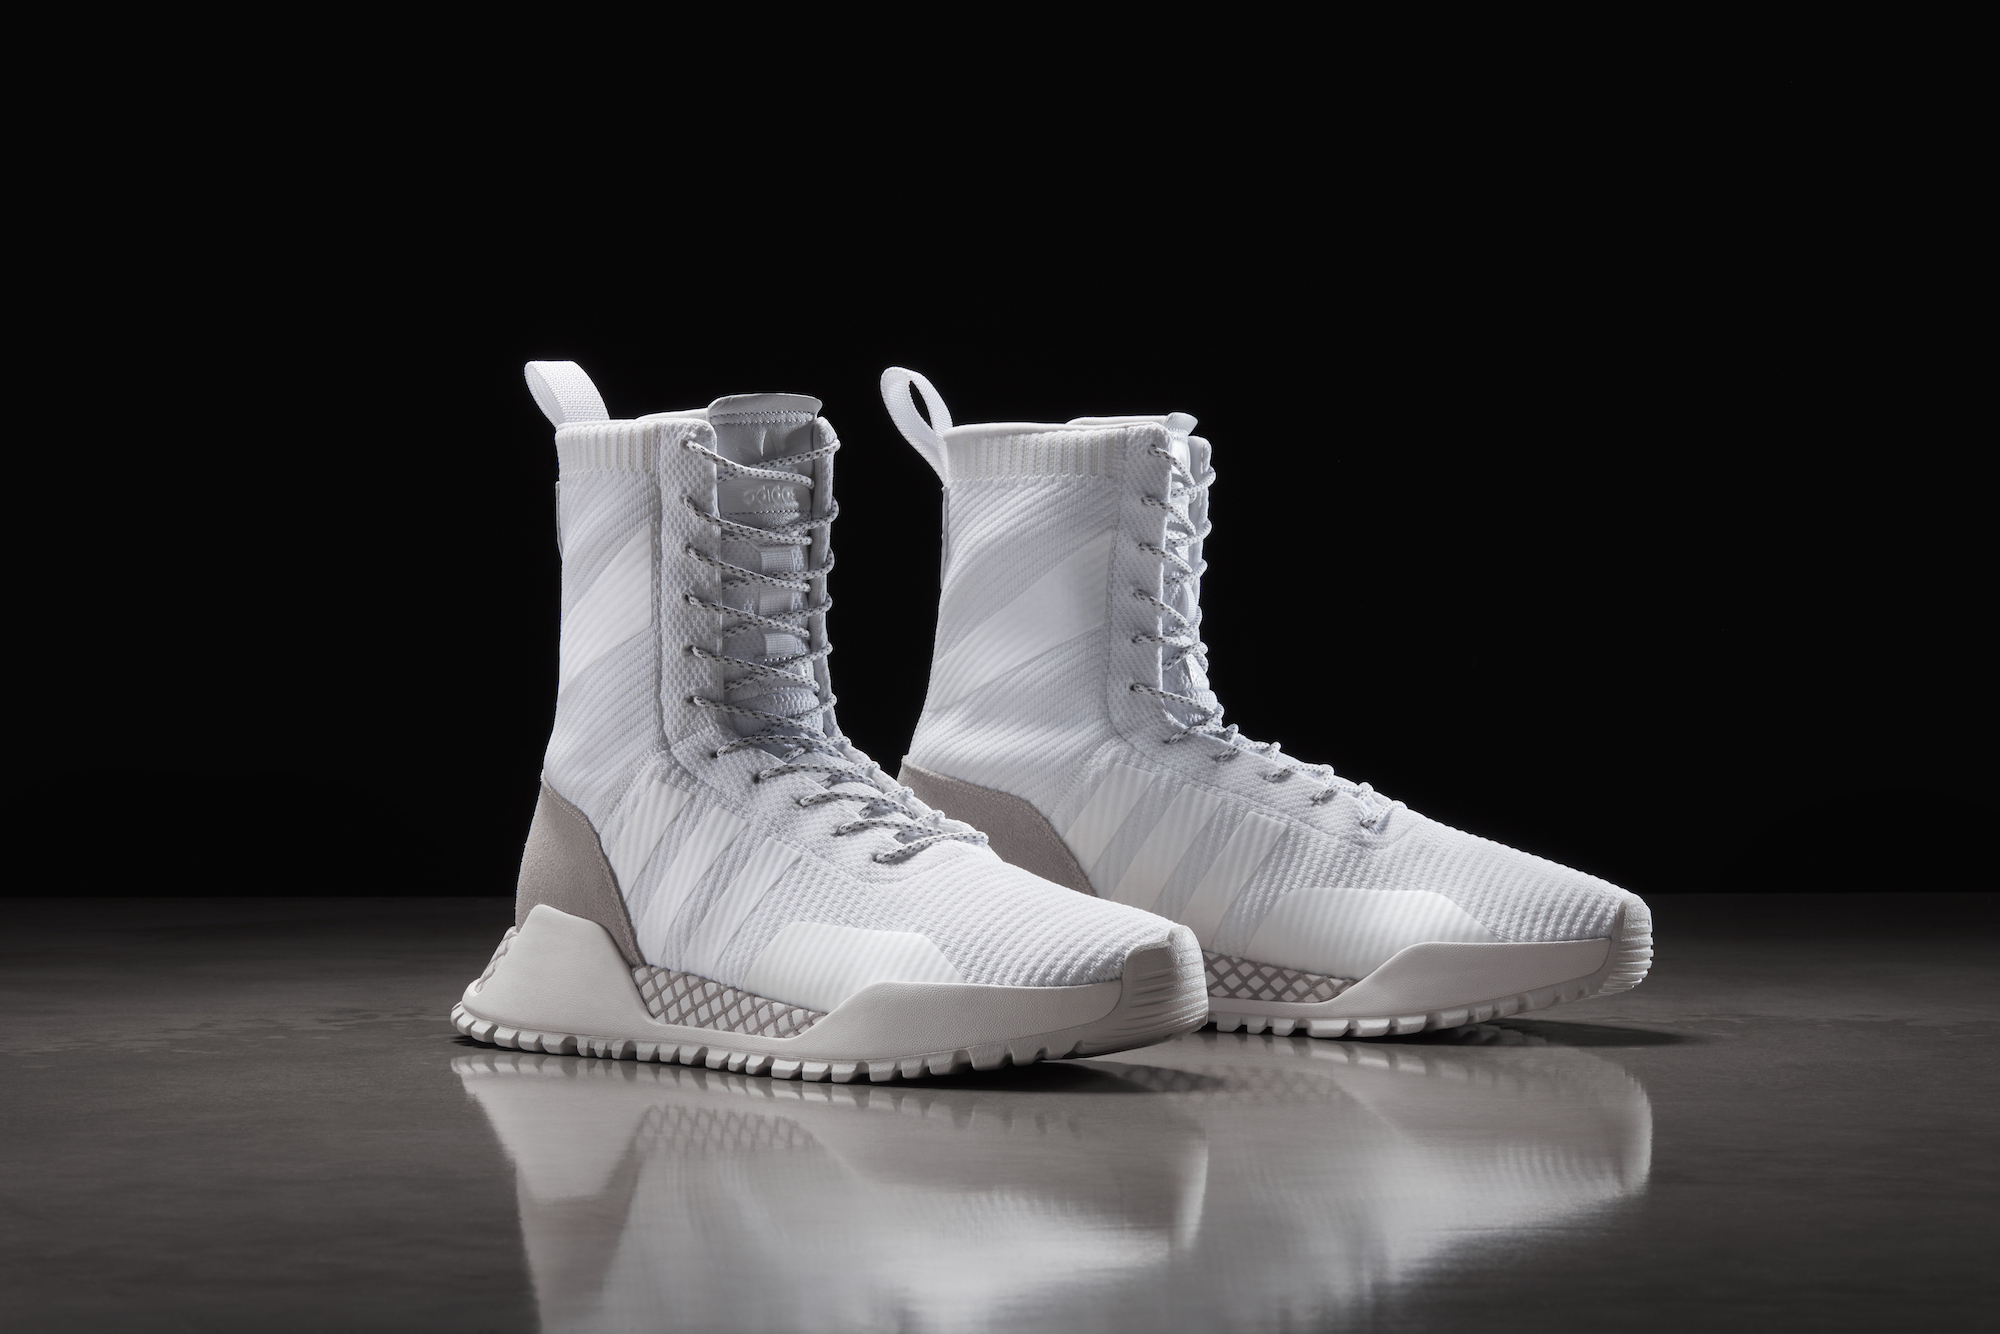 adidas Unveils the AF 1.3 PK, a Weather-Proof Primeknit Boot - WearTesters